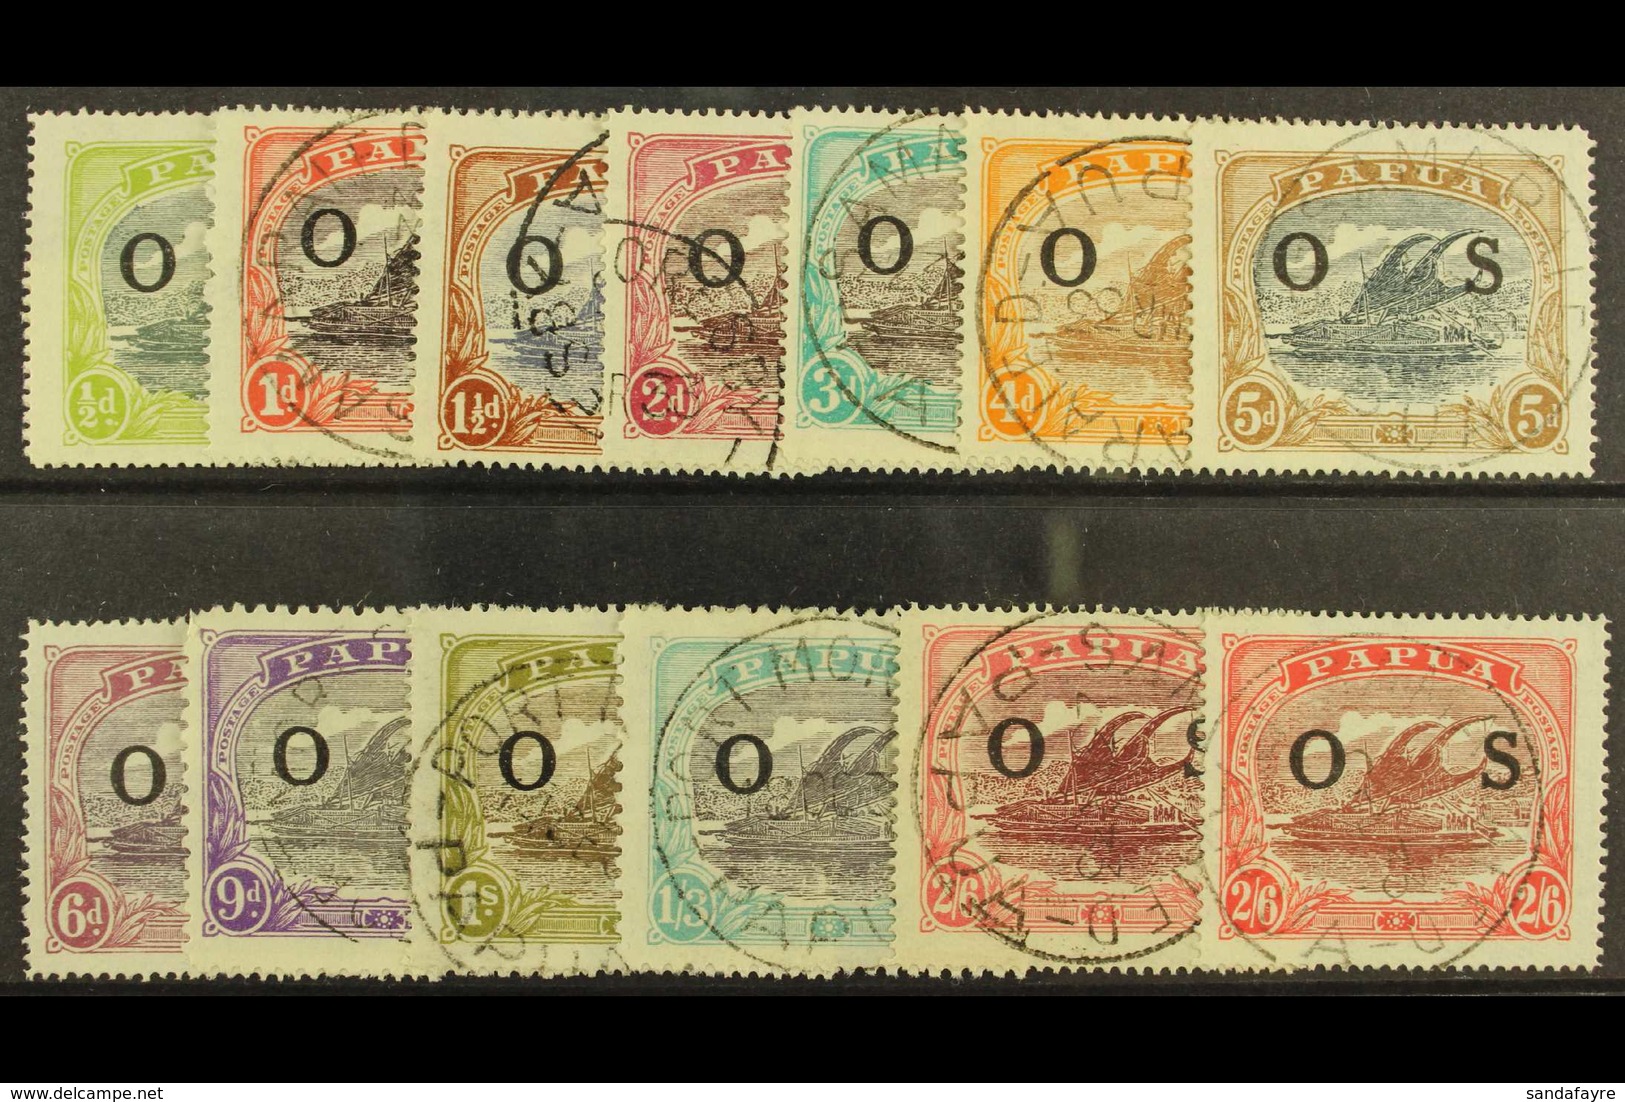 OFFICIALS 1931-32 Complete Overprinted Set, SG O55/66, With Both 2s6d Shades, Superb Cds Used. (13) For More Images, Ple - Papua New Guinea